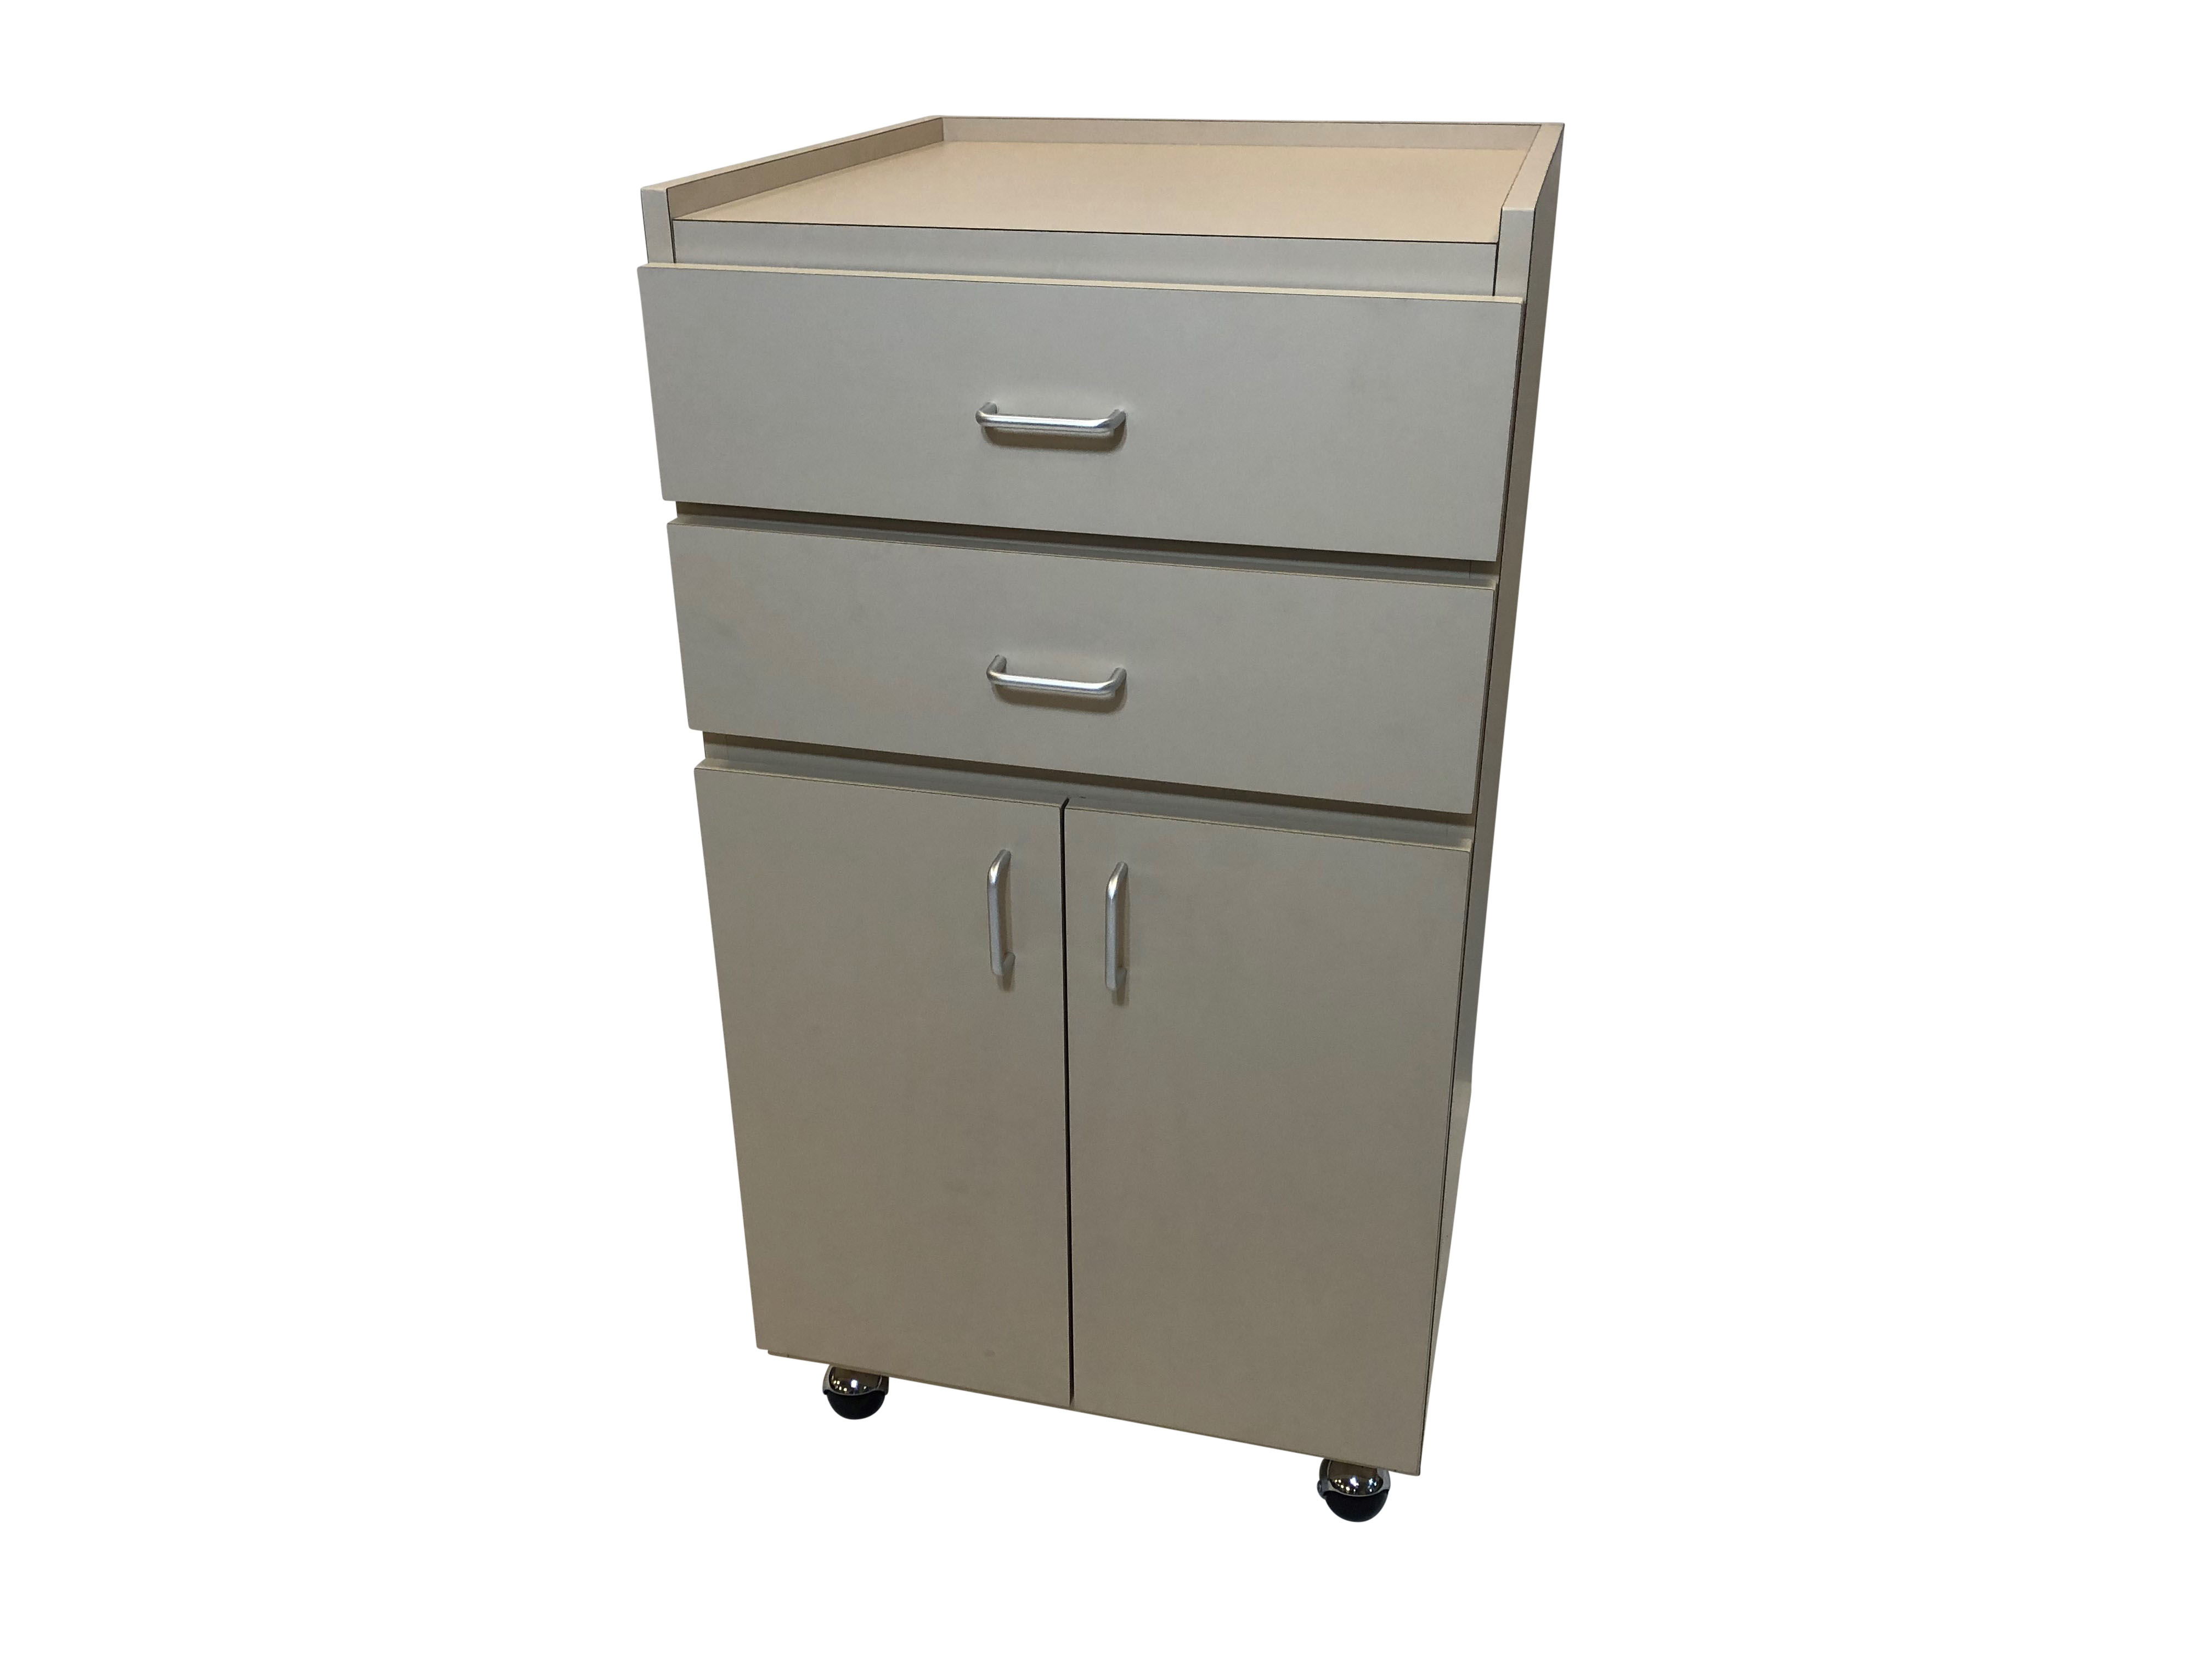 Supply Cabinet - Assorted Colors 